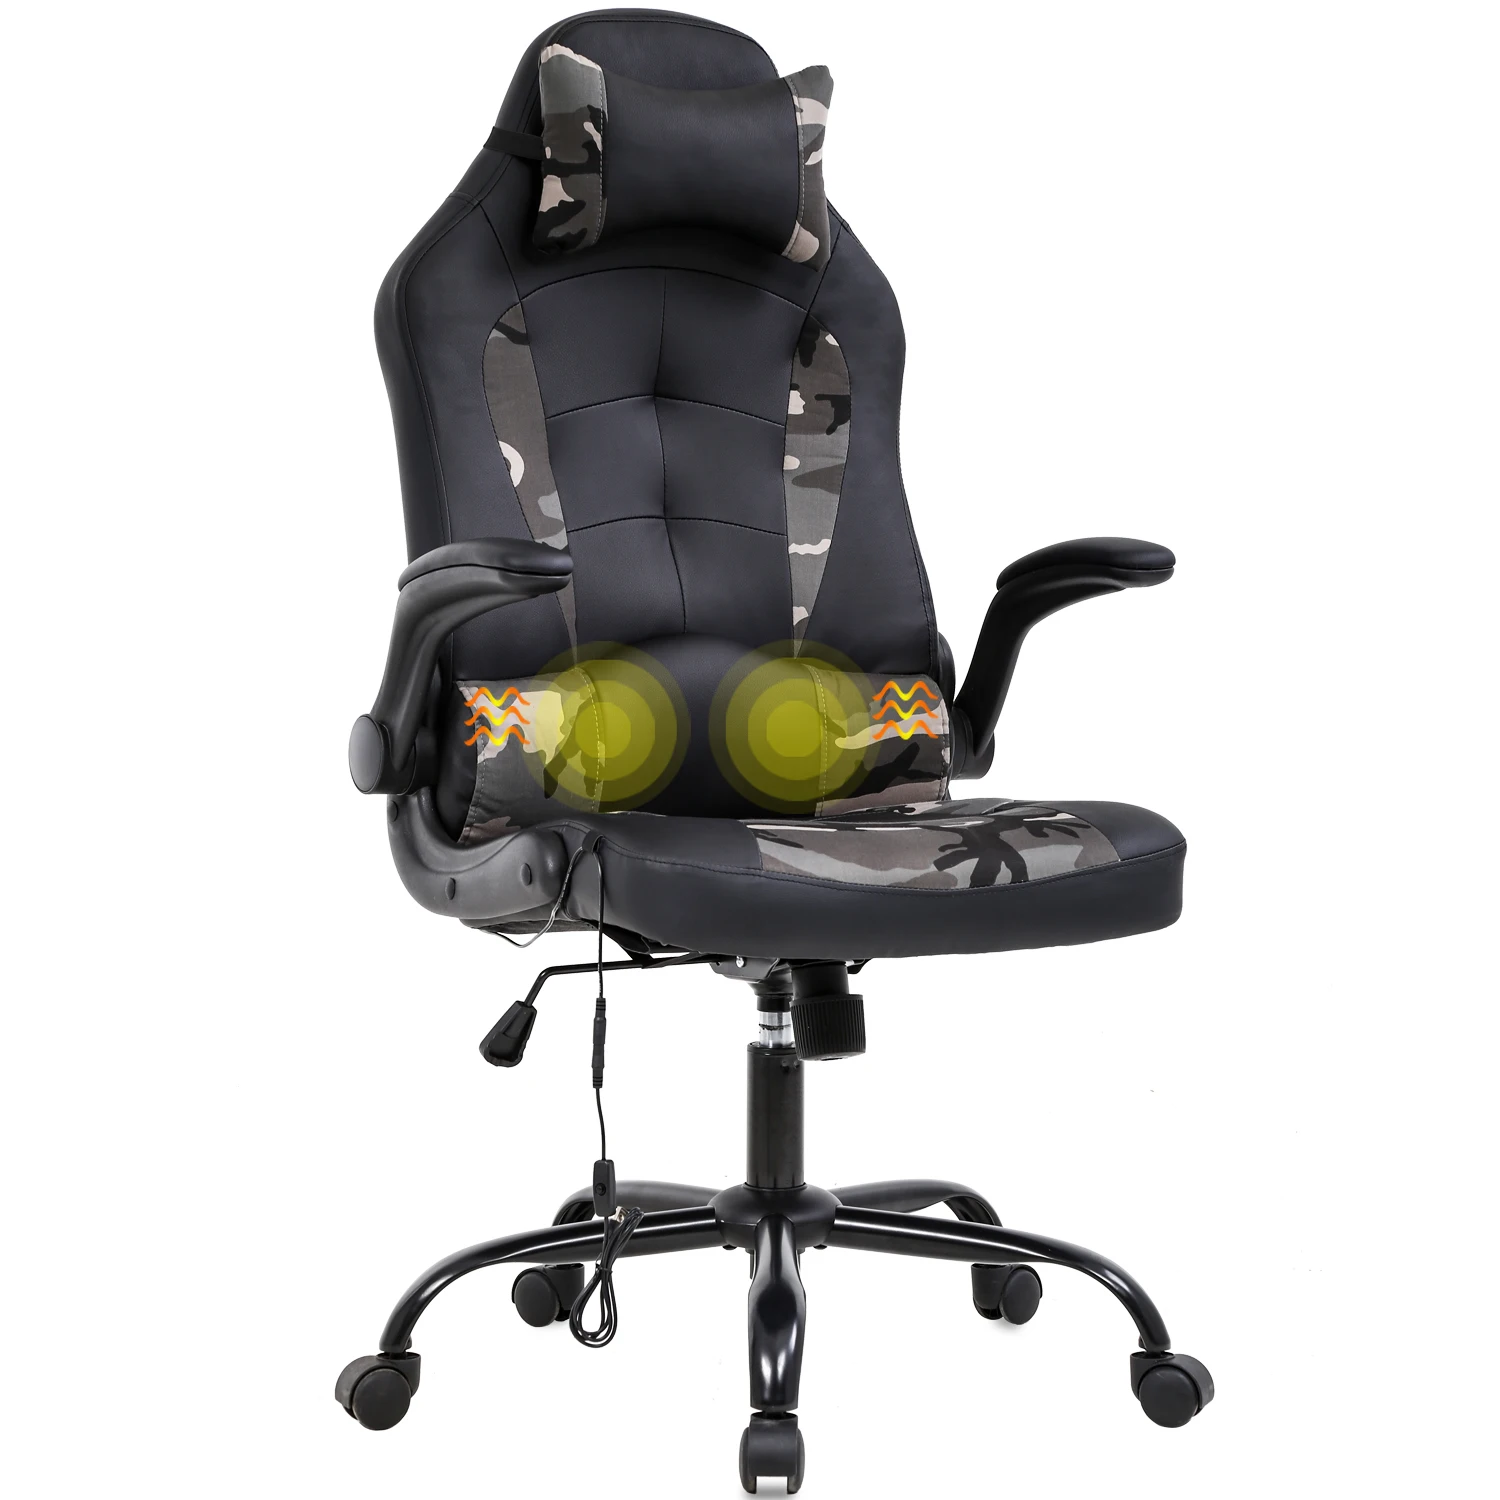 High Back Game Office Chair With Massage Buy Office Gaming High Back Gaming Chair Wholesale Plastic Office Chair Easy Work Plastic Office Chair Product On Alibaba Com